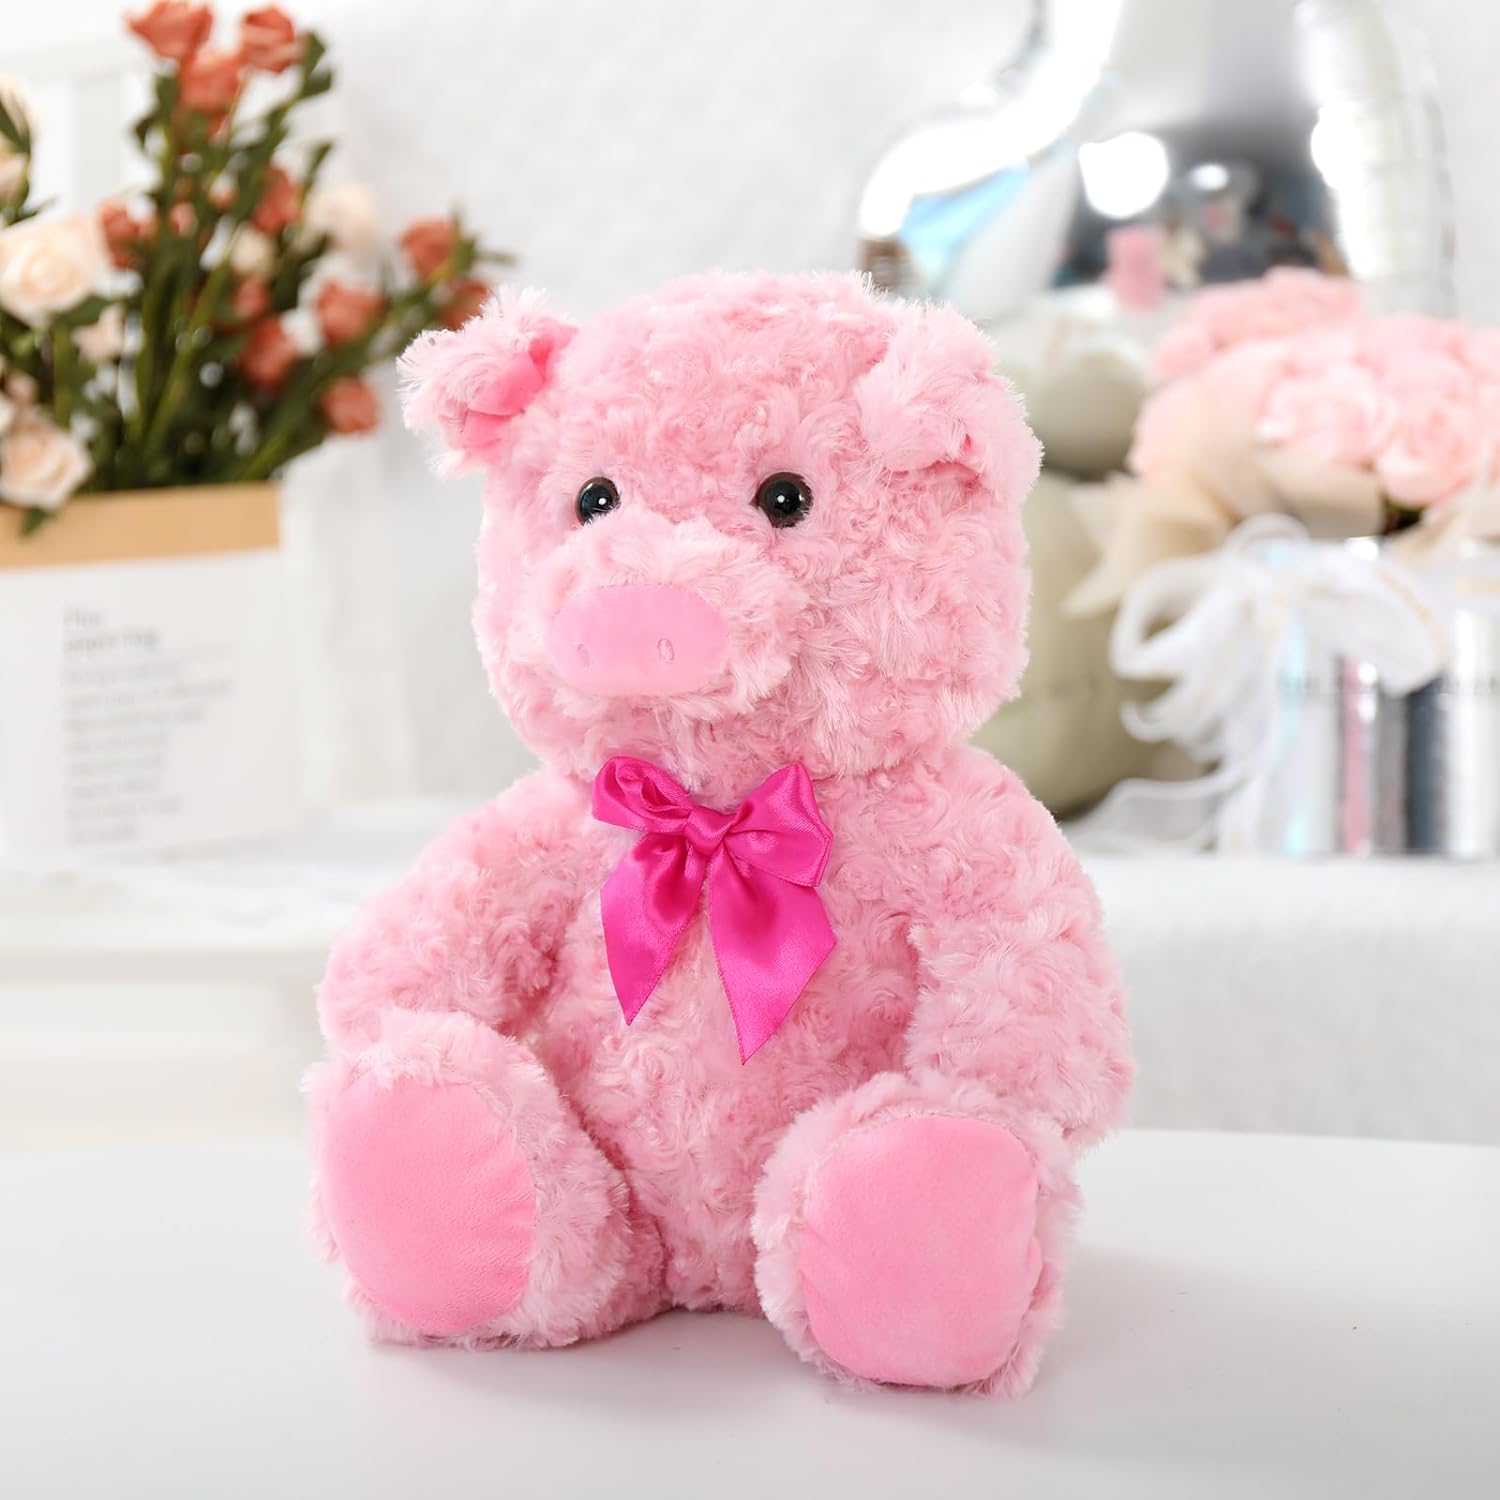 Cute Pig Plush Toy, Pink, 12 Inches